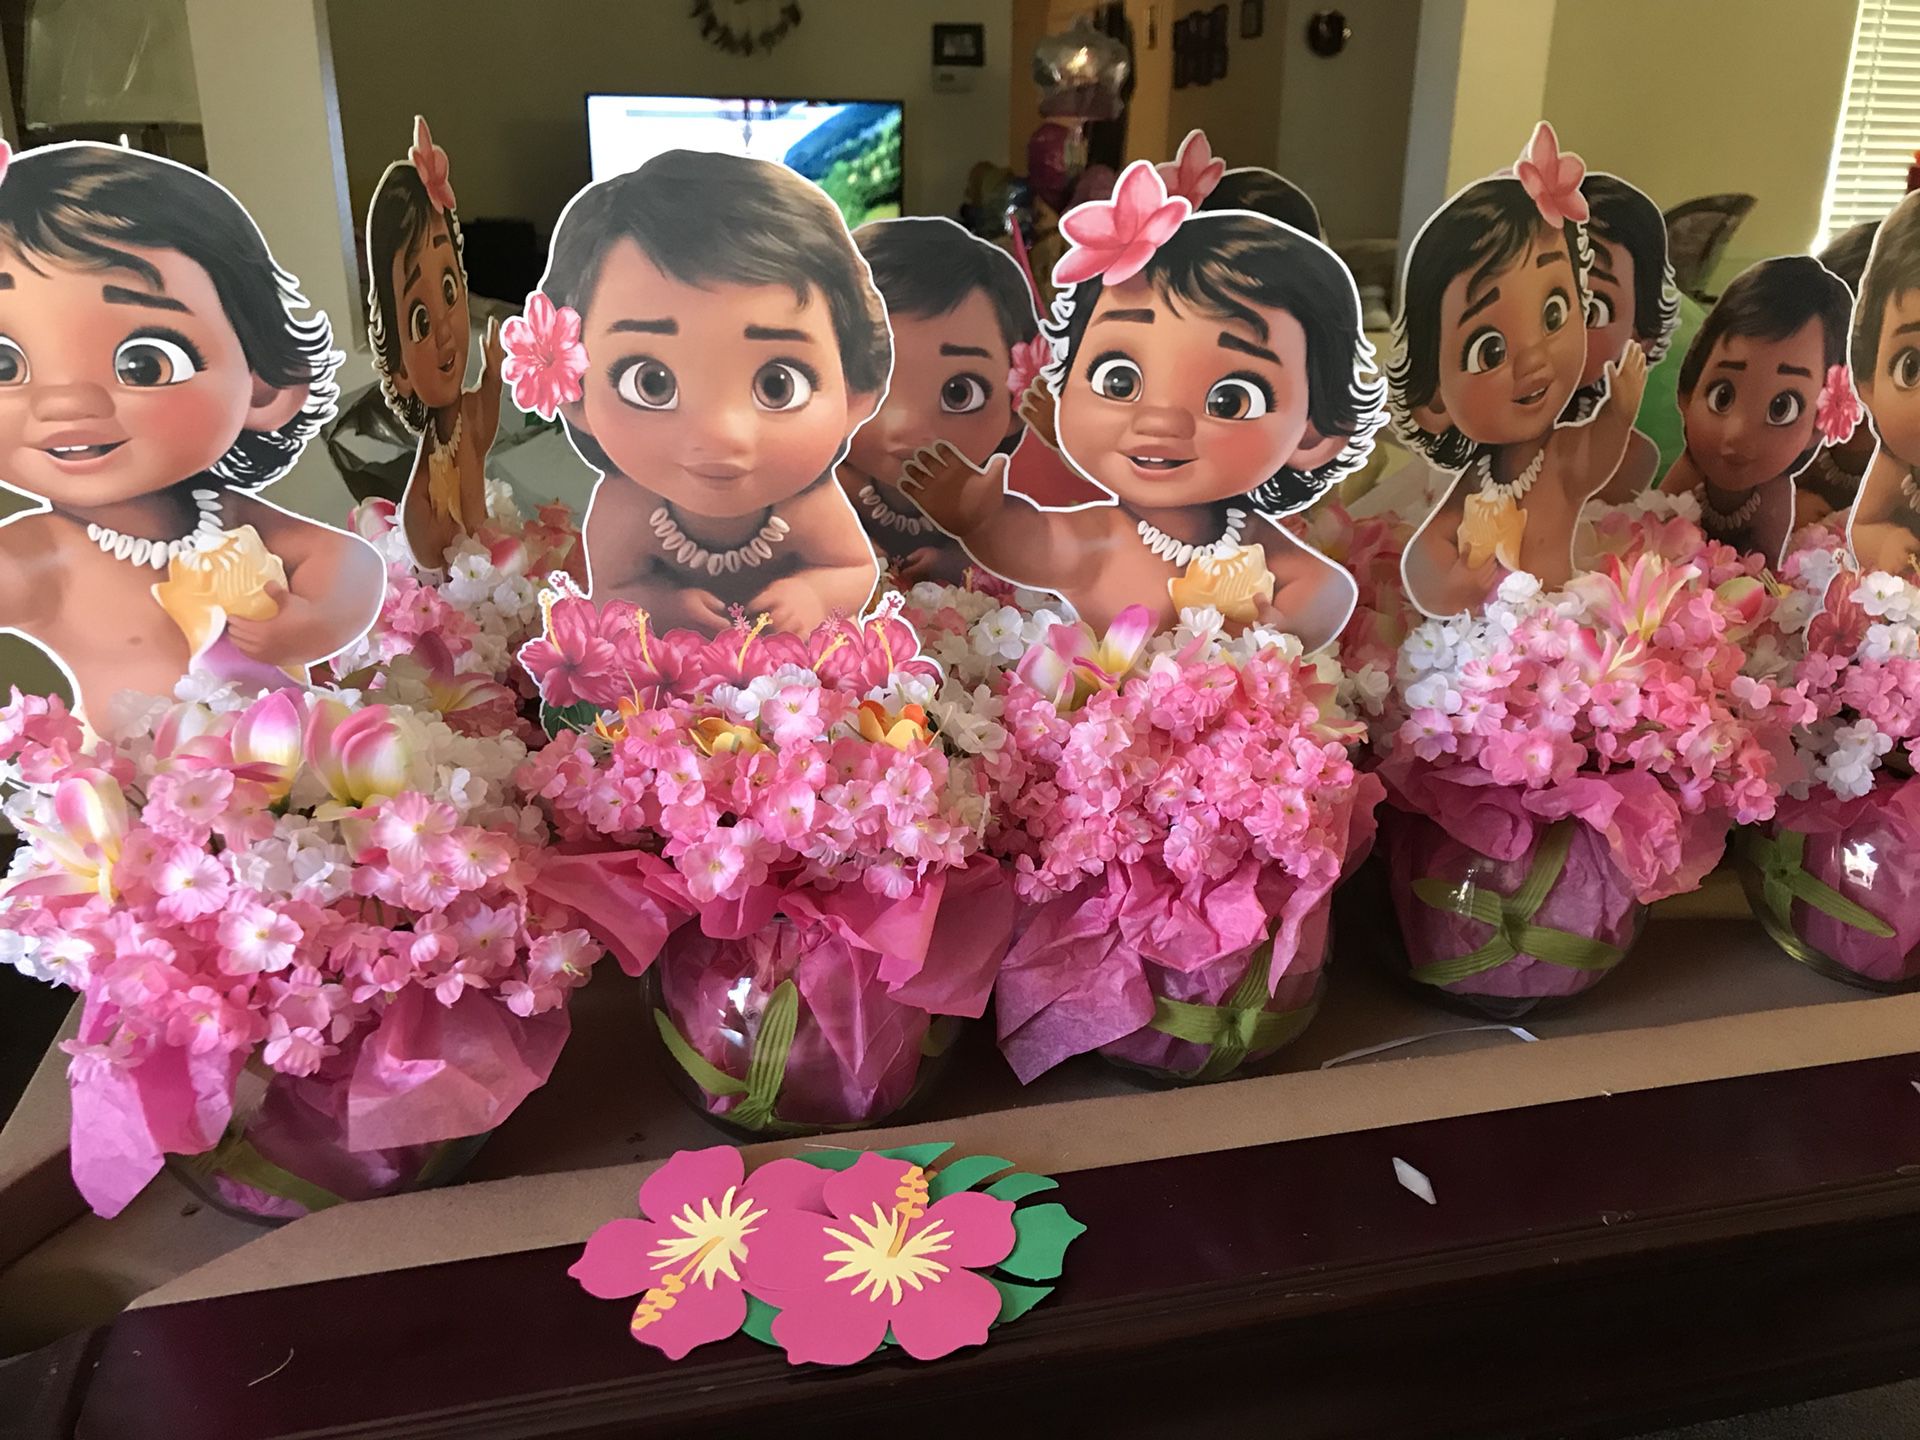 Baby Moana birthday decorations for Sale in Hemet, CA - OfferUp